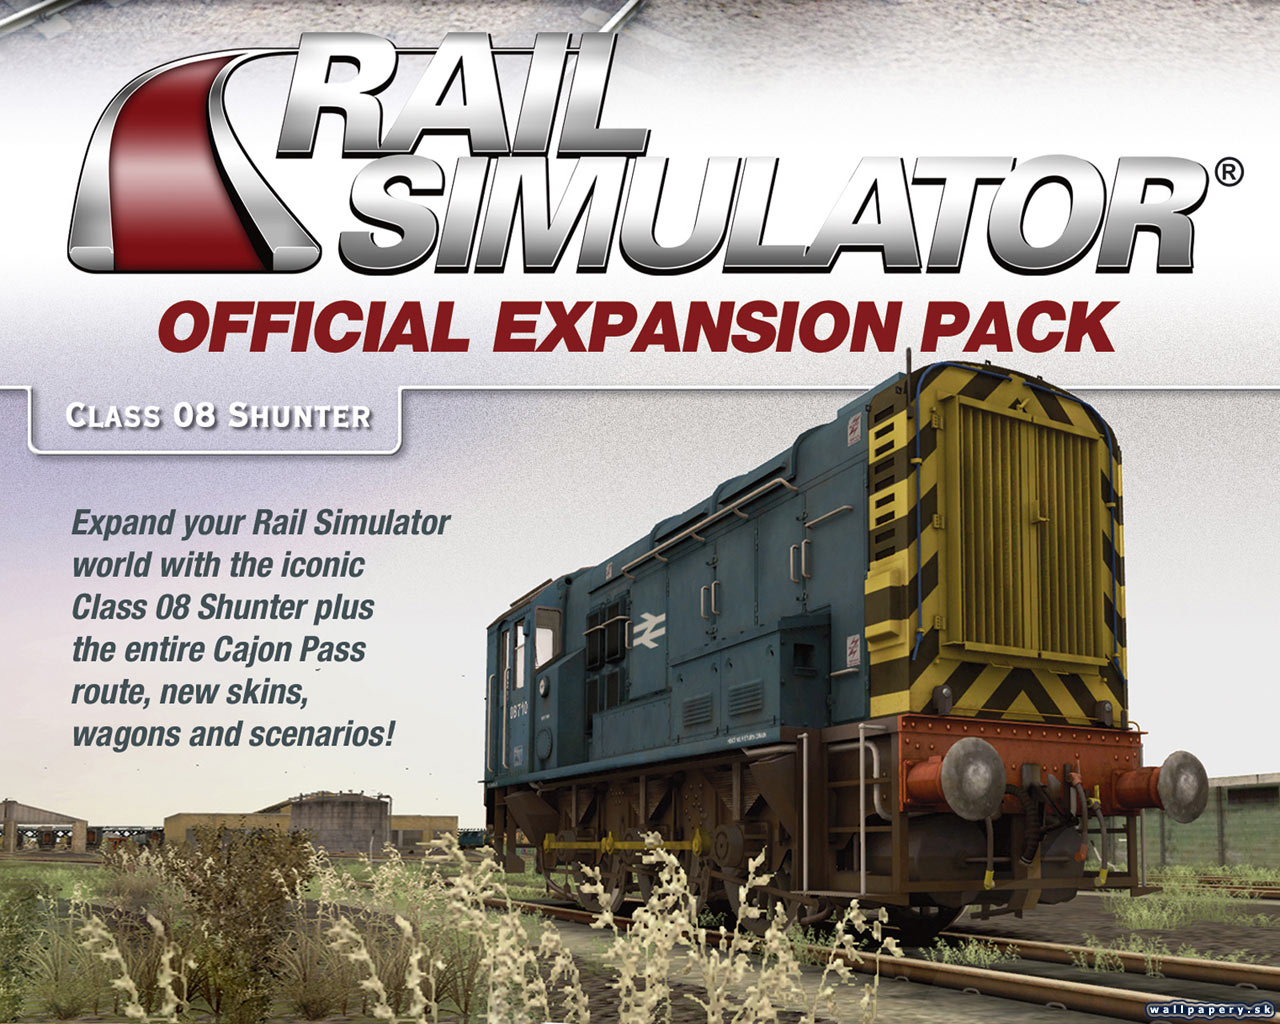 Rail Simulator - Official Expansion Pack - wallpaper 1